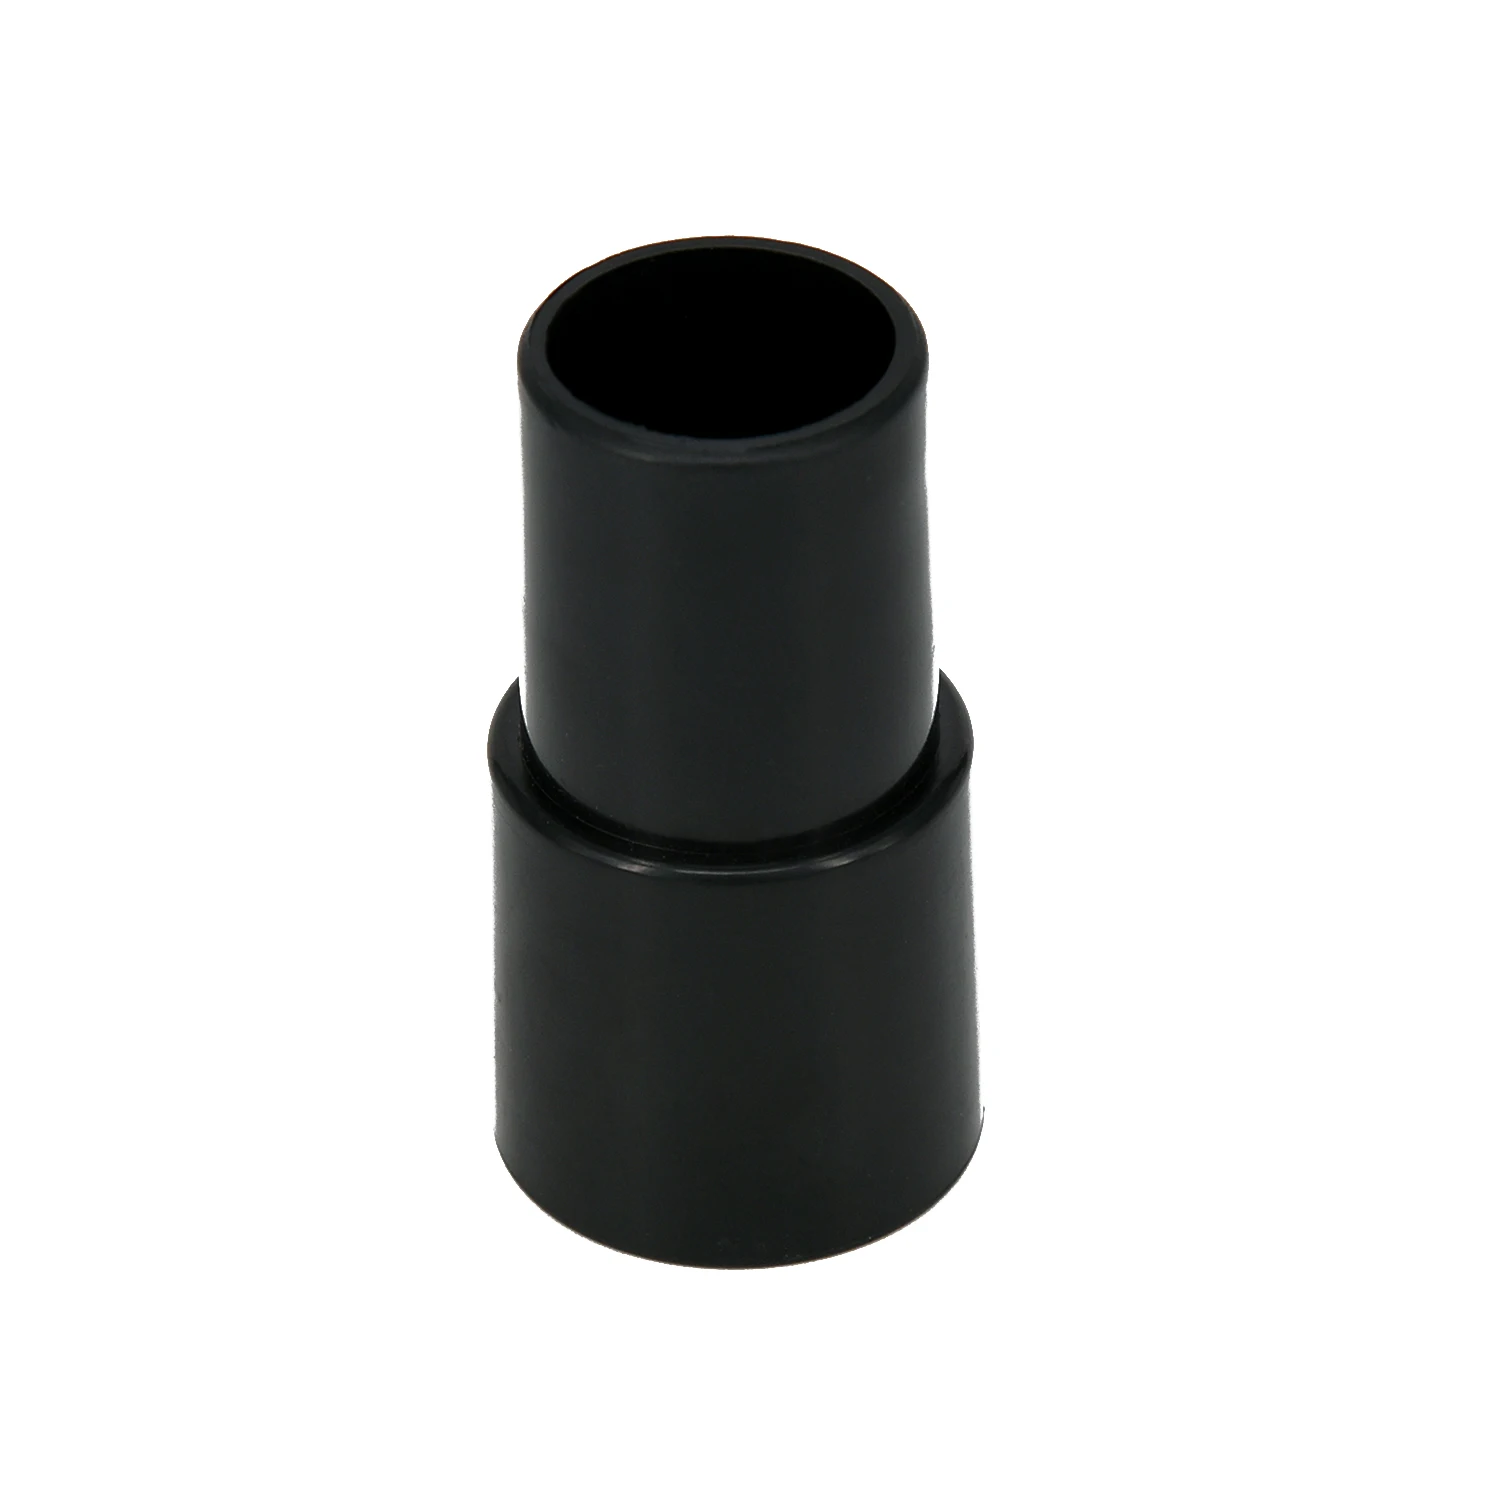 

Tool Hose Adapter Kit Adapters Connecting For 32mm-35mm Vacuum Cleaners 1pc D11 D15 32mm to 35 mm Vacuum Cleaner